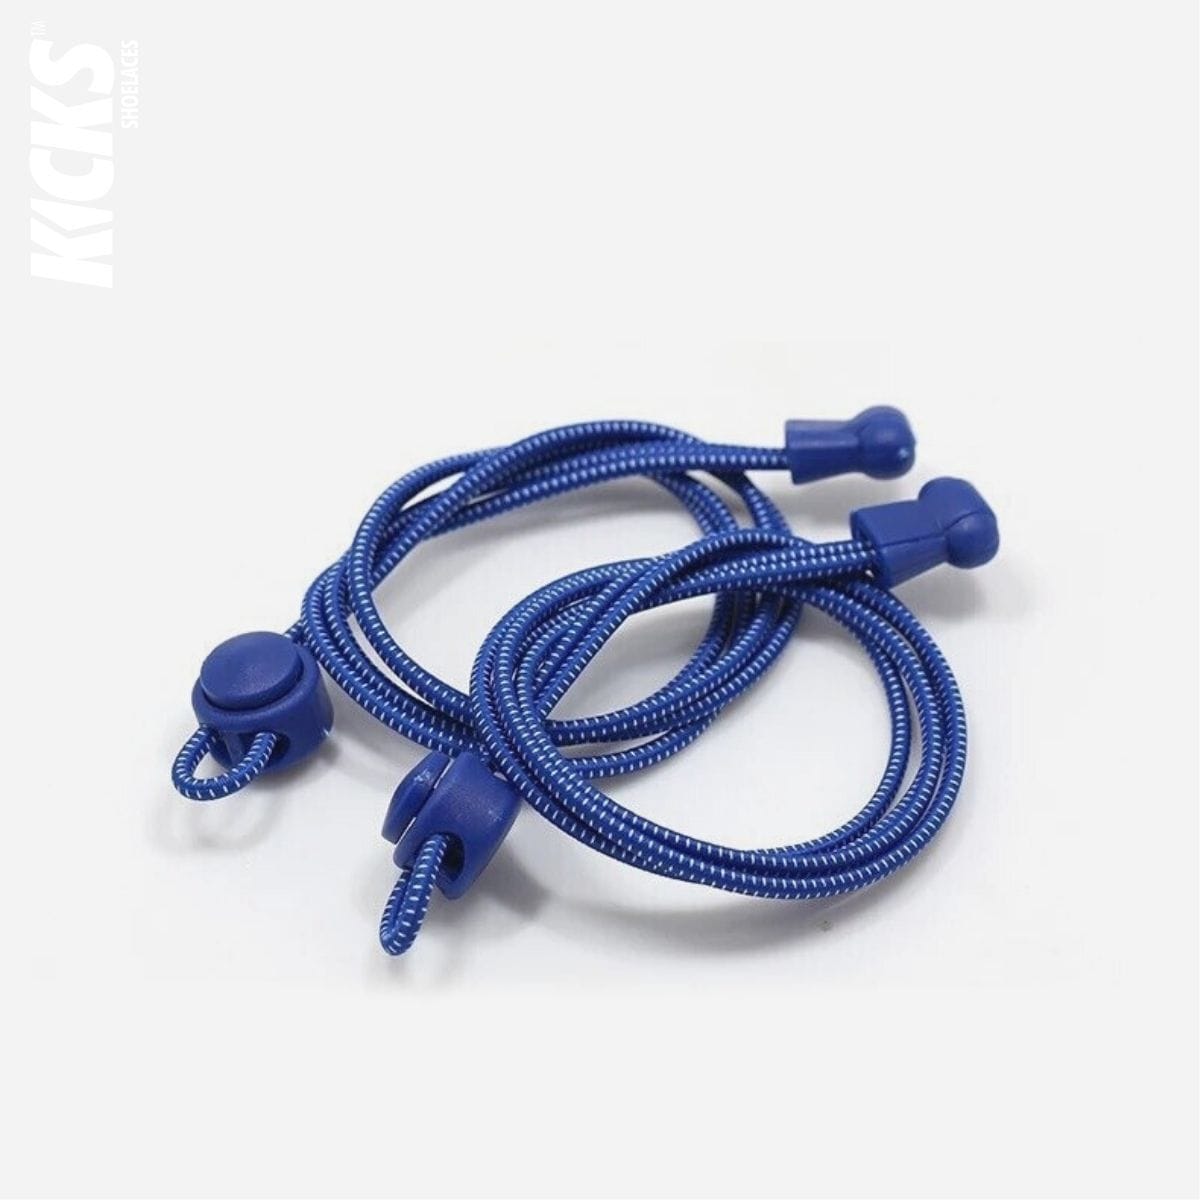 royal-blue-no-tie elastic-running-shoelaces-with-matching-lace-locks-by-kicks-shoelaces